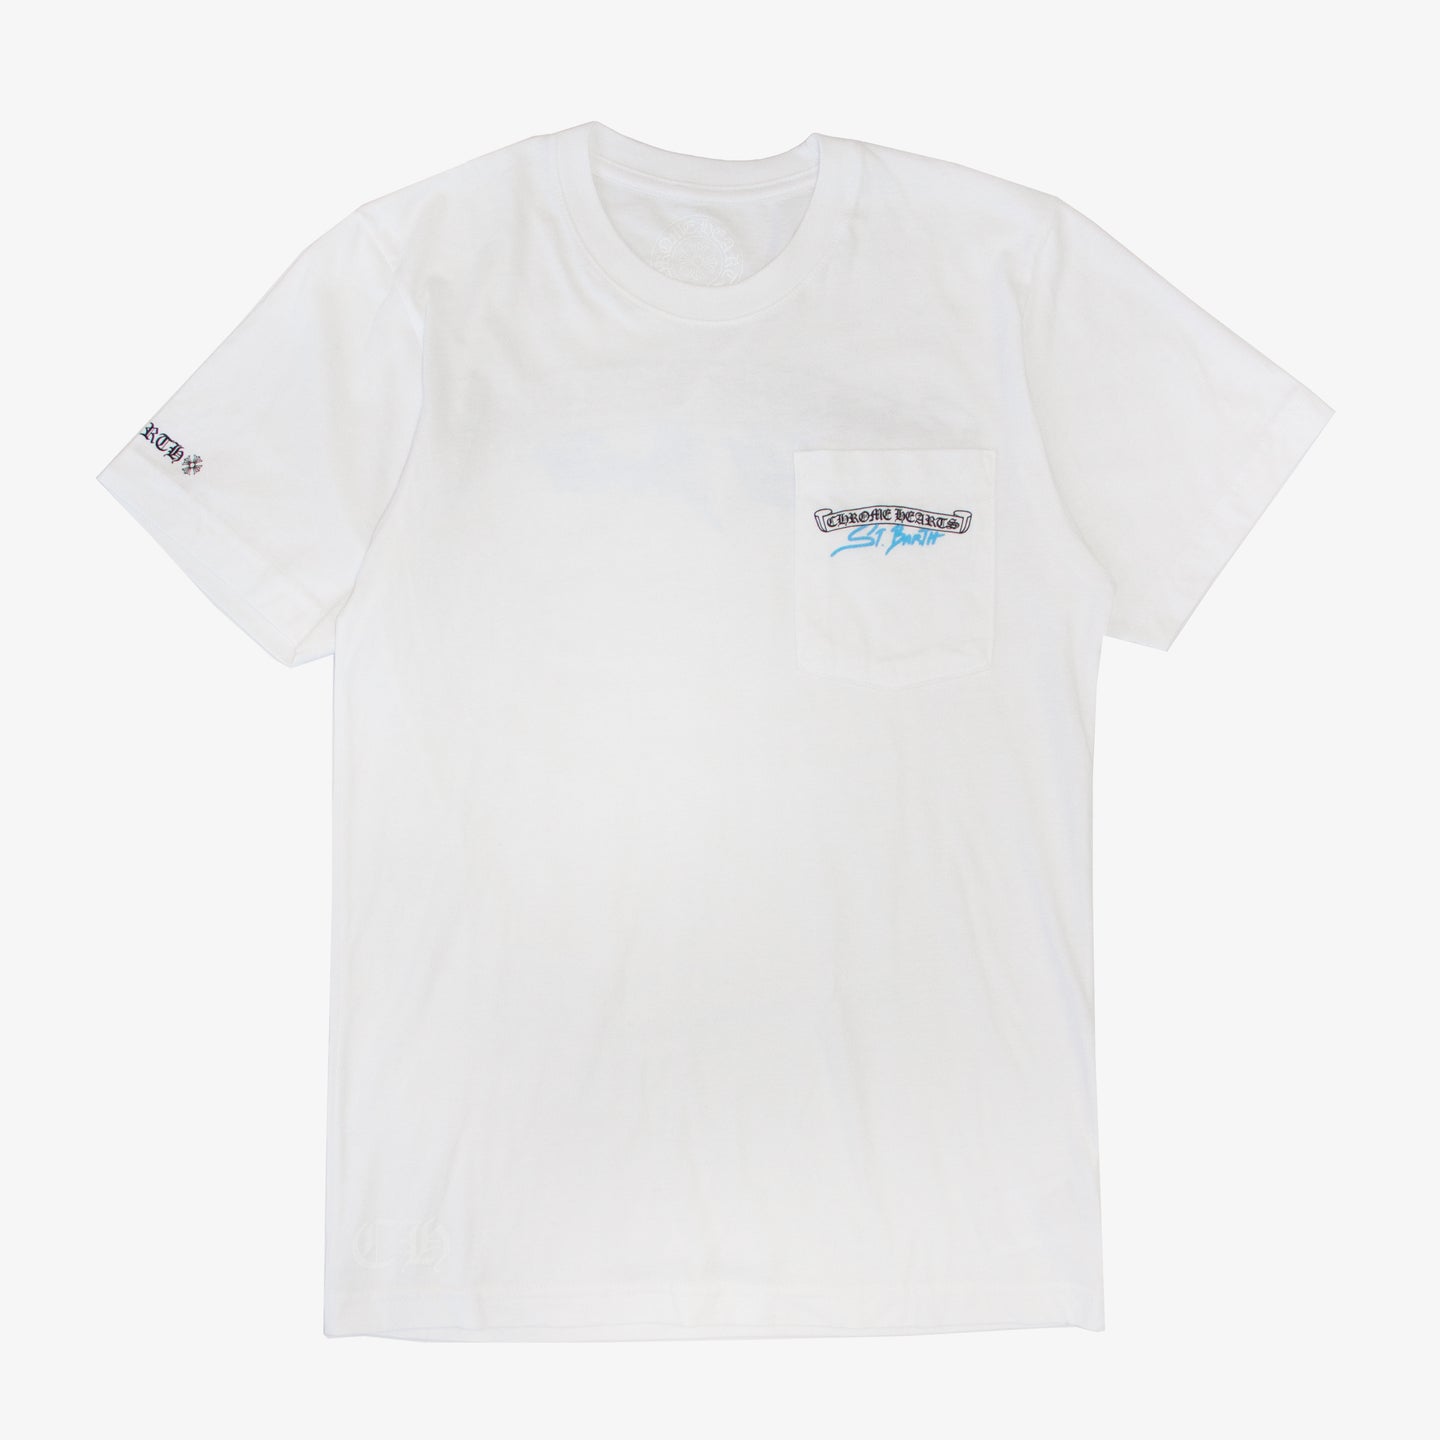 ST. BARTH EXCLUSIVE TEE